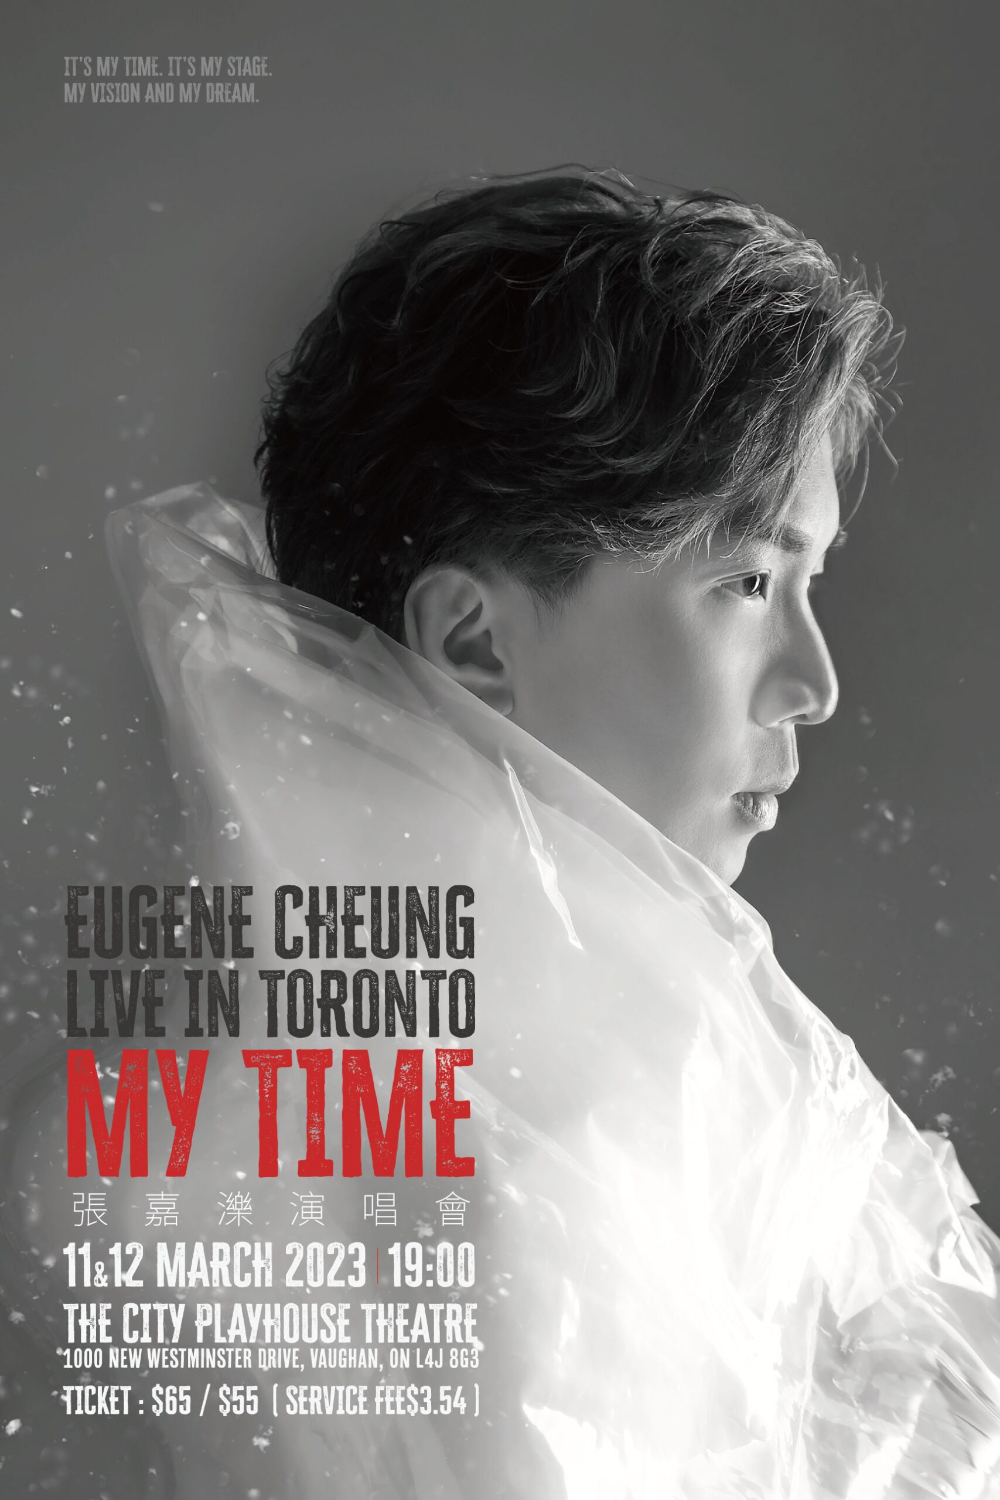 EUGENE CHEUNG LIVE IN TORONTO《MY TIME》Concert